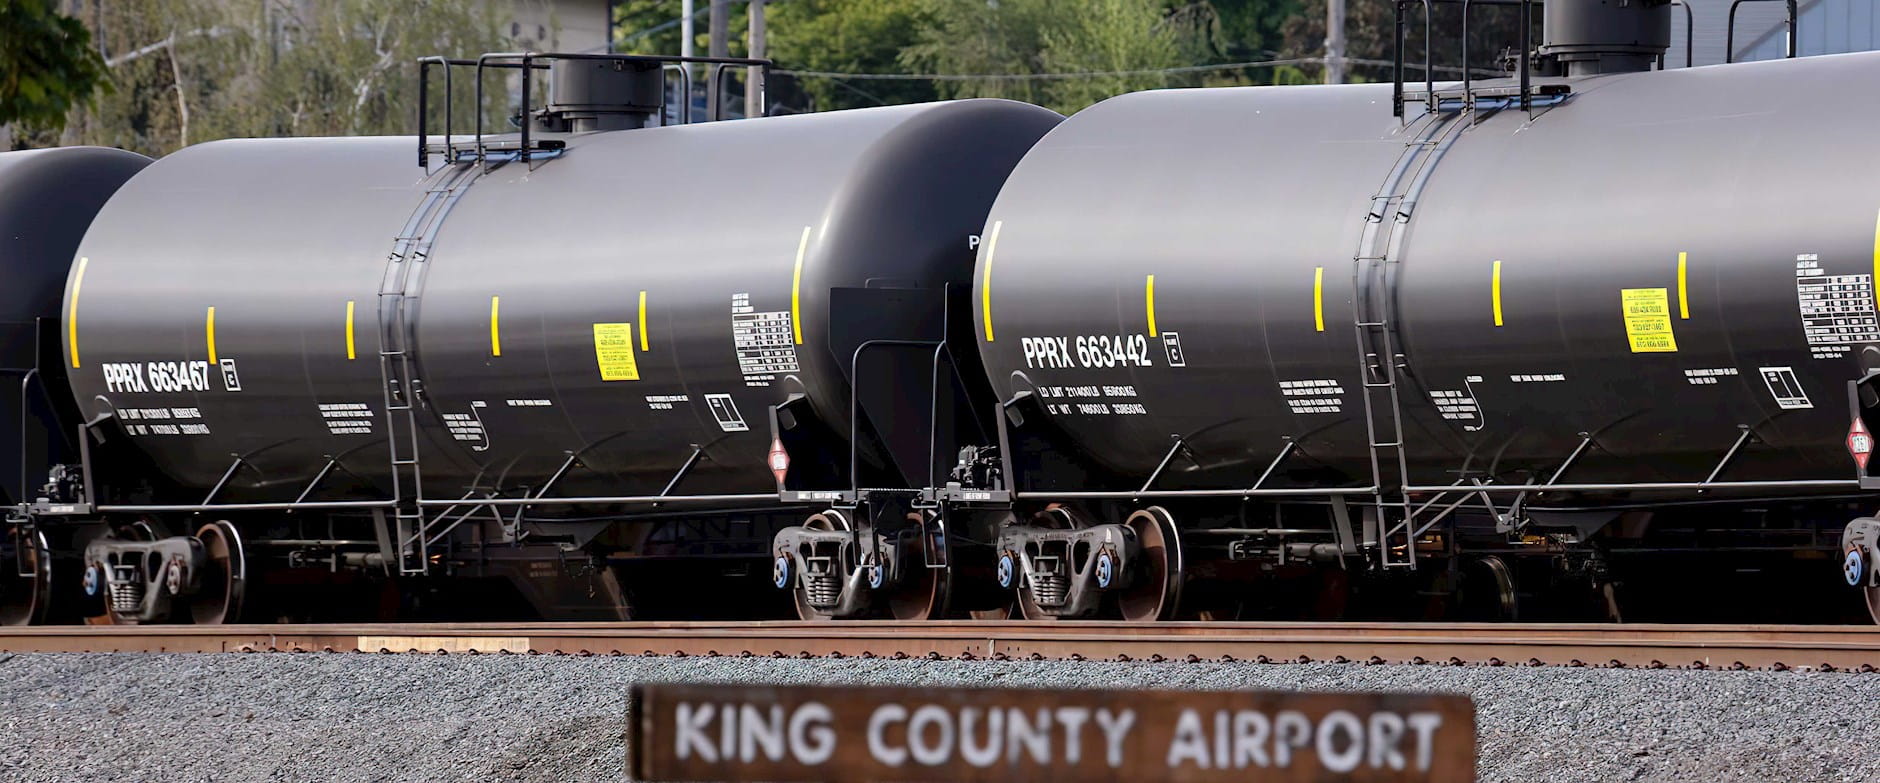 Trains transporting oil at Kings County Airport